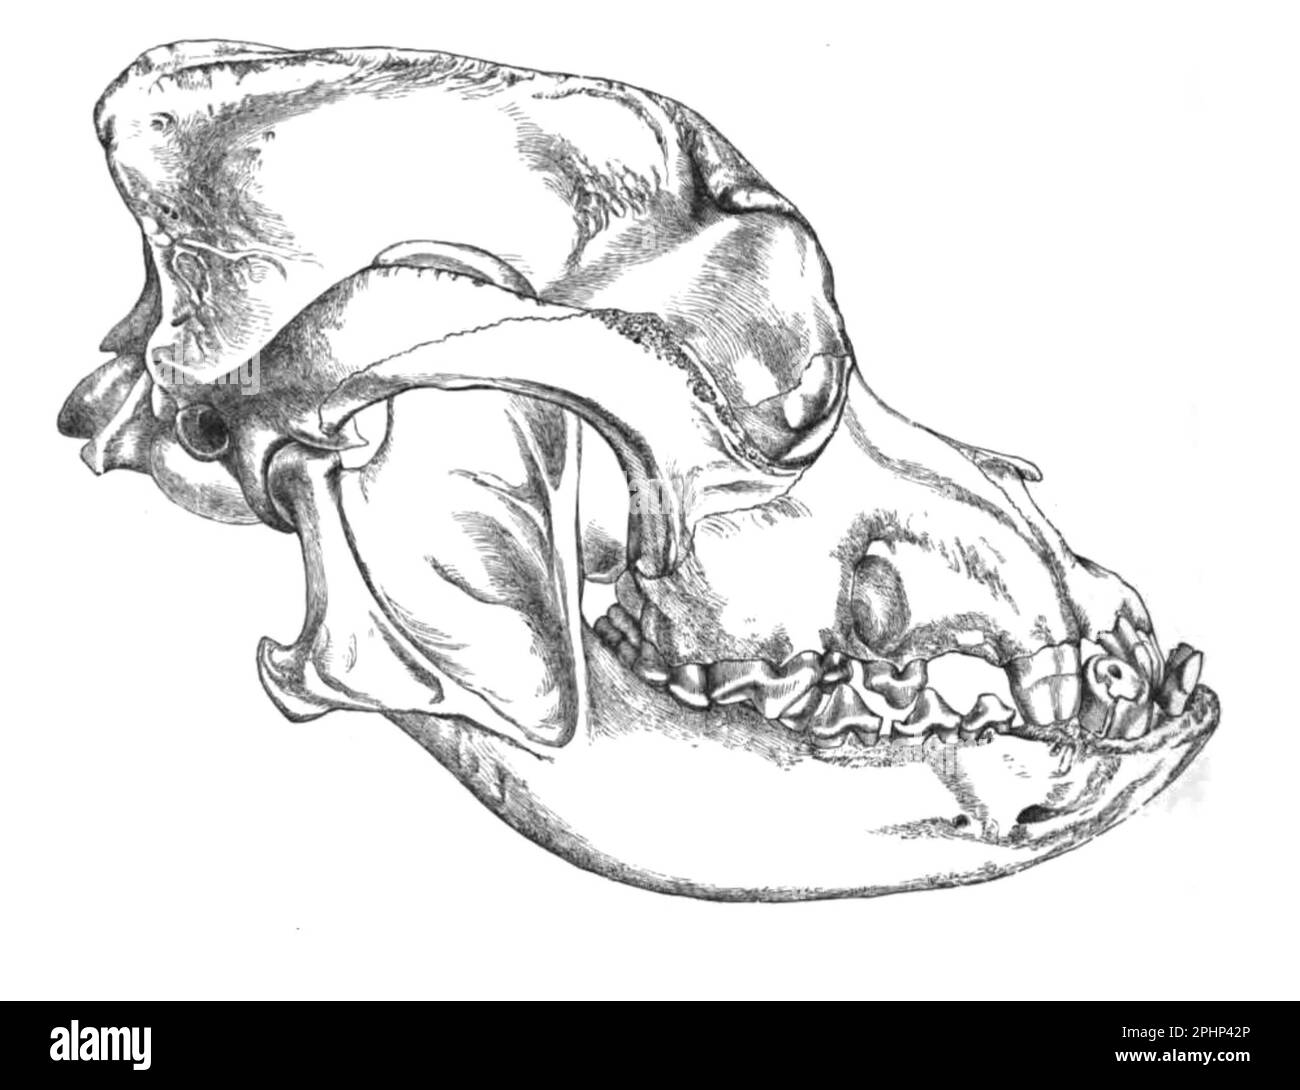 The Dental cosmos. Skull of bulldog. shows a pig which won first prize as  the the express purpose of coursing the hare, best white hog at a Royal  Agricultural in which